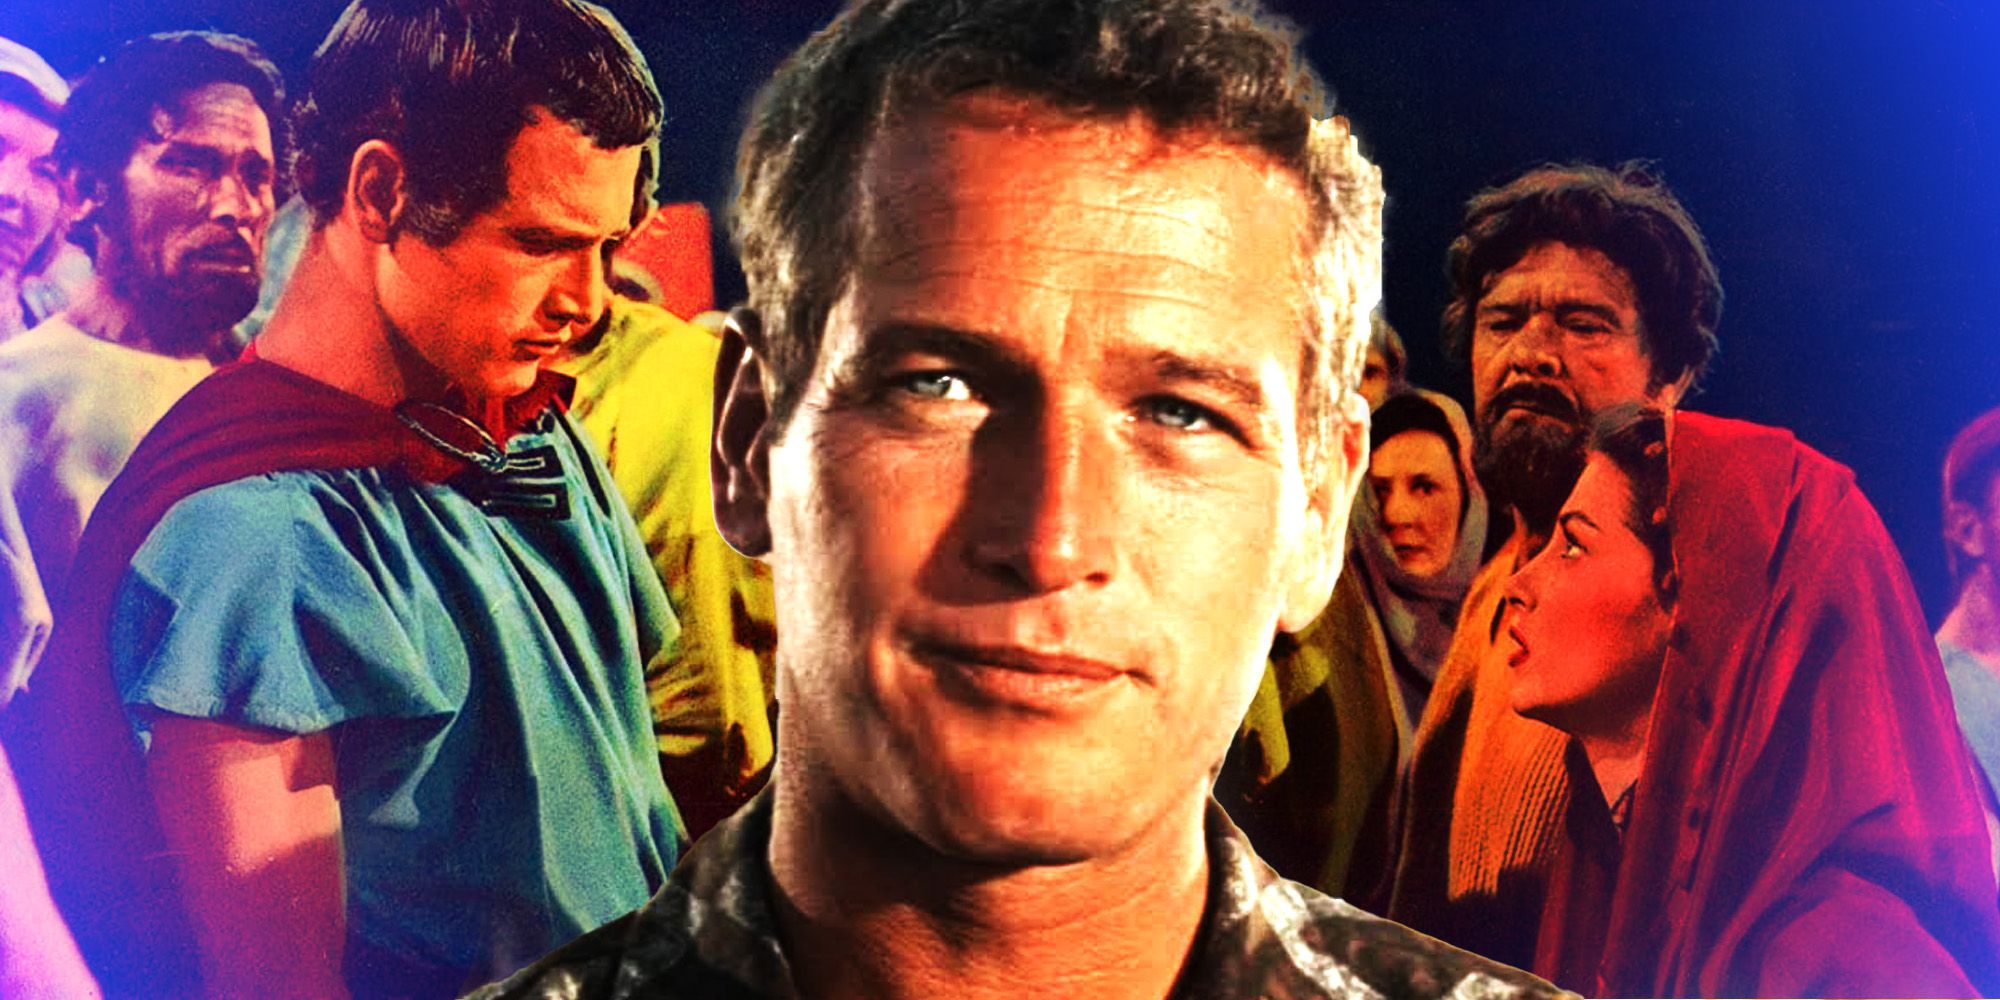 What did Paul Newman apologize for?